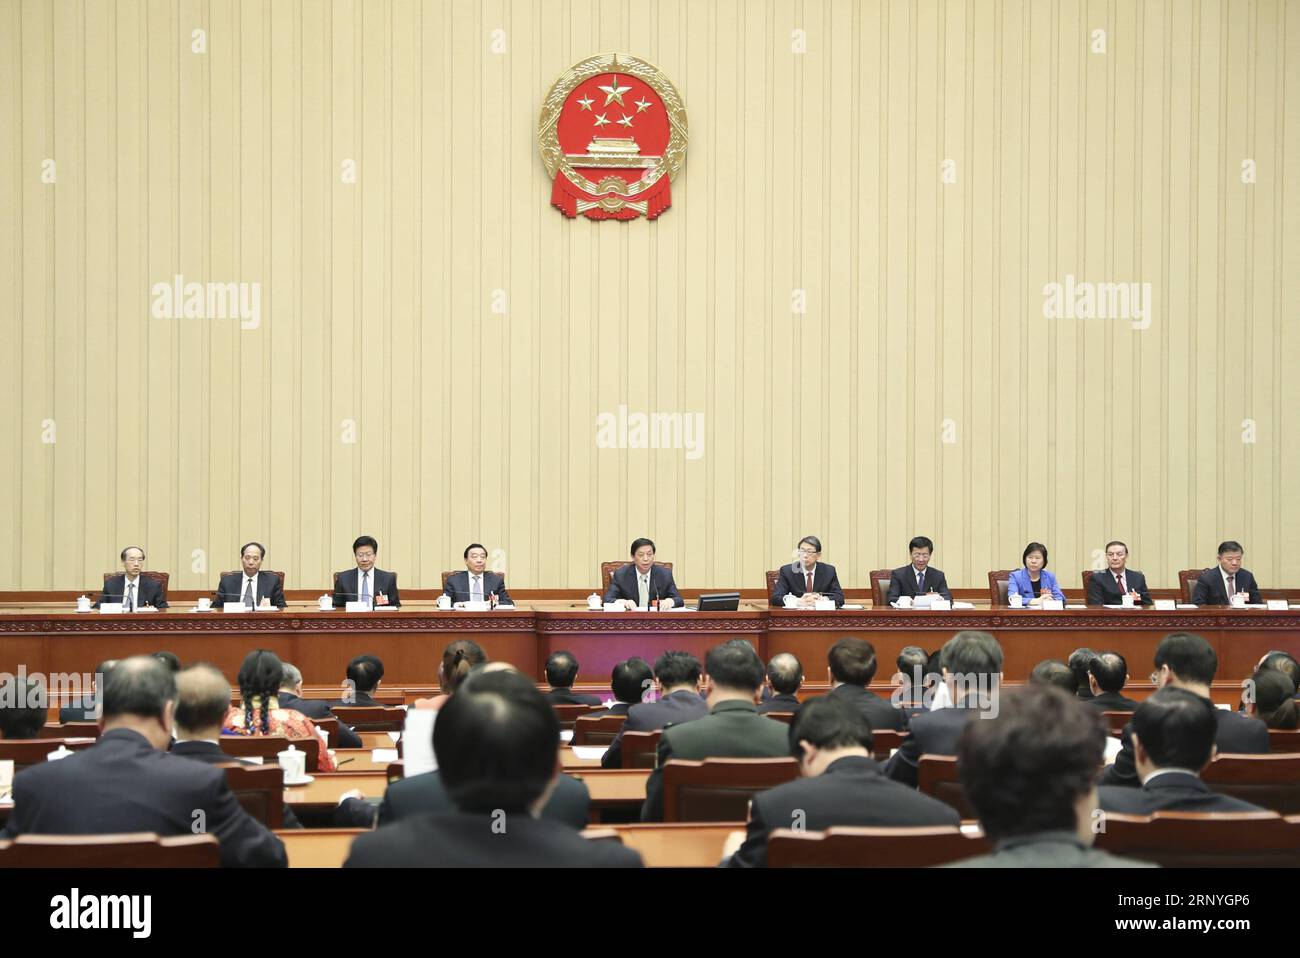 (180319) -- BEIJING, March 19, 2018 -- Li Zhanshu, executive chairperson of the presidium of the first session of the 13th National People s Congress (NPC), presides over the 11th meeting of the presidium at the Great Hall of the People in Beijing, capital of China, March 19, 2018. ) (TWO SESSIONS)CHINA-BEIJING-NPC-PRESIDIUM-MEETING (CN) XiexHuanchi PUBLICATIONxNOTxINxCHN Stock Photo